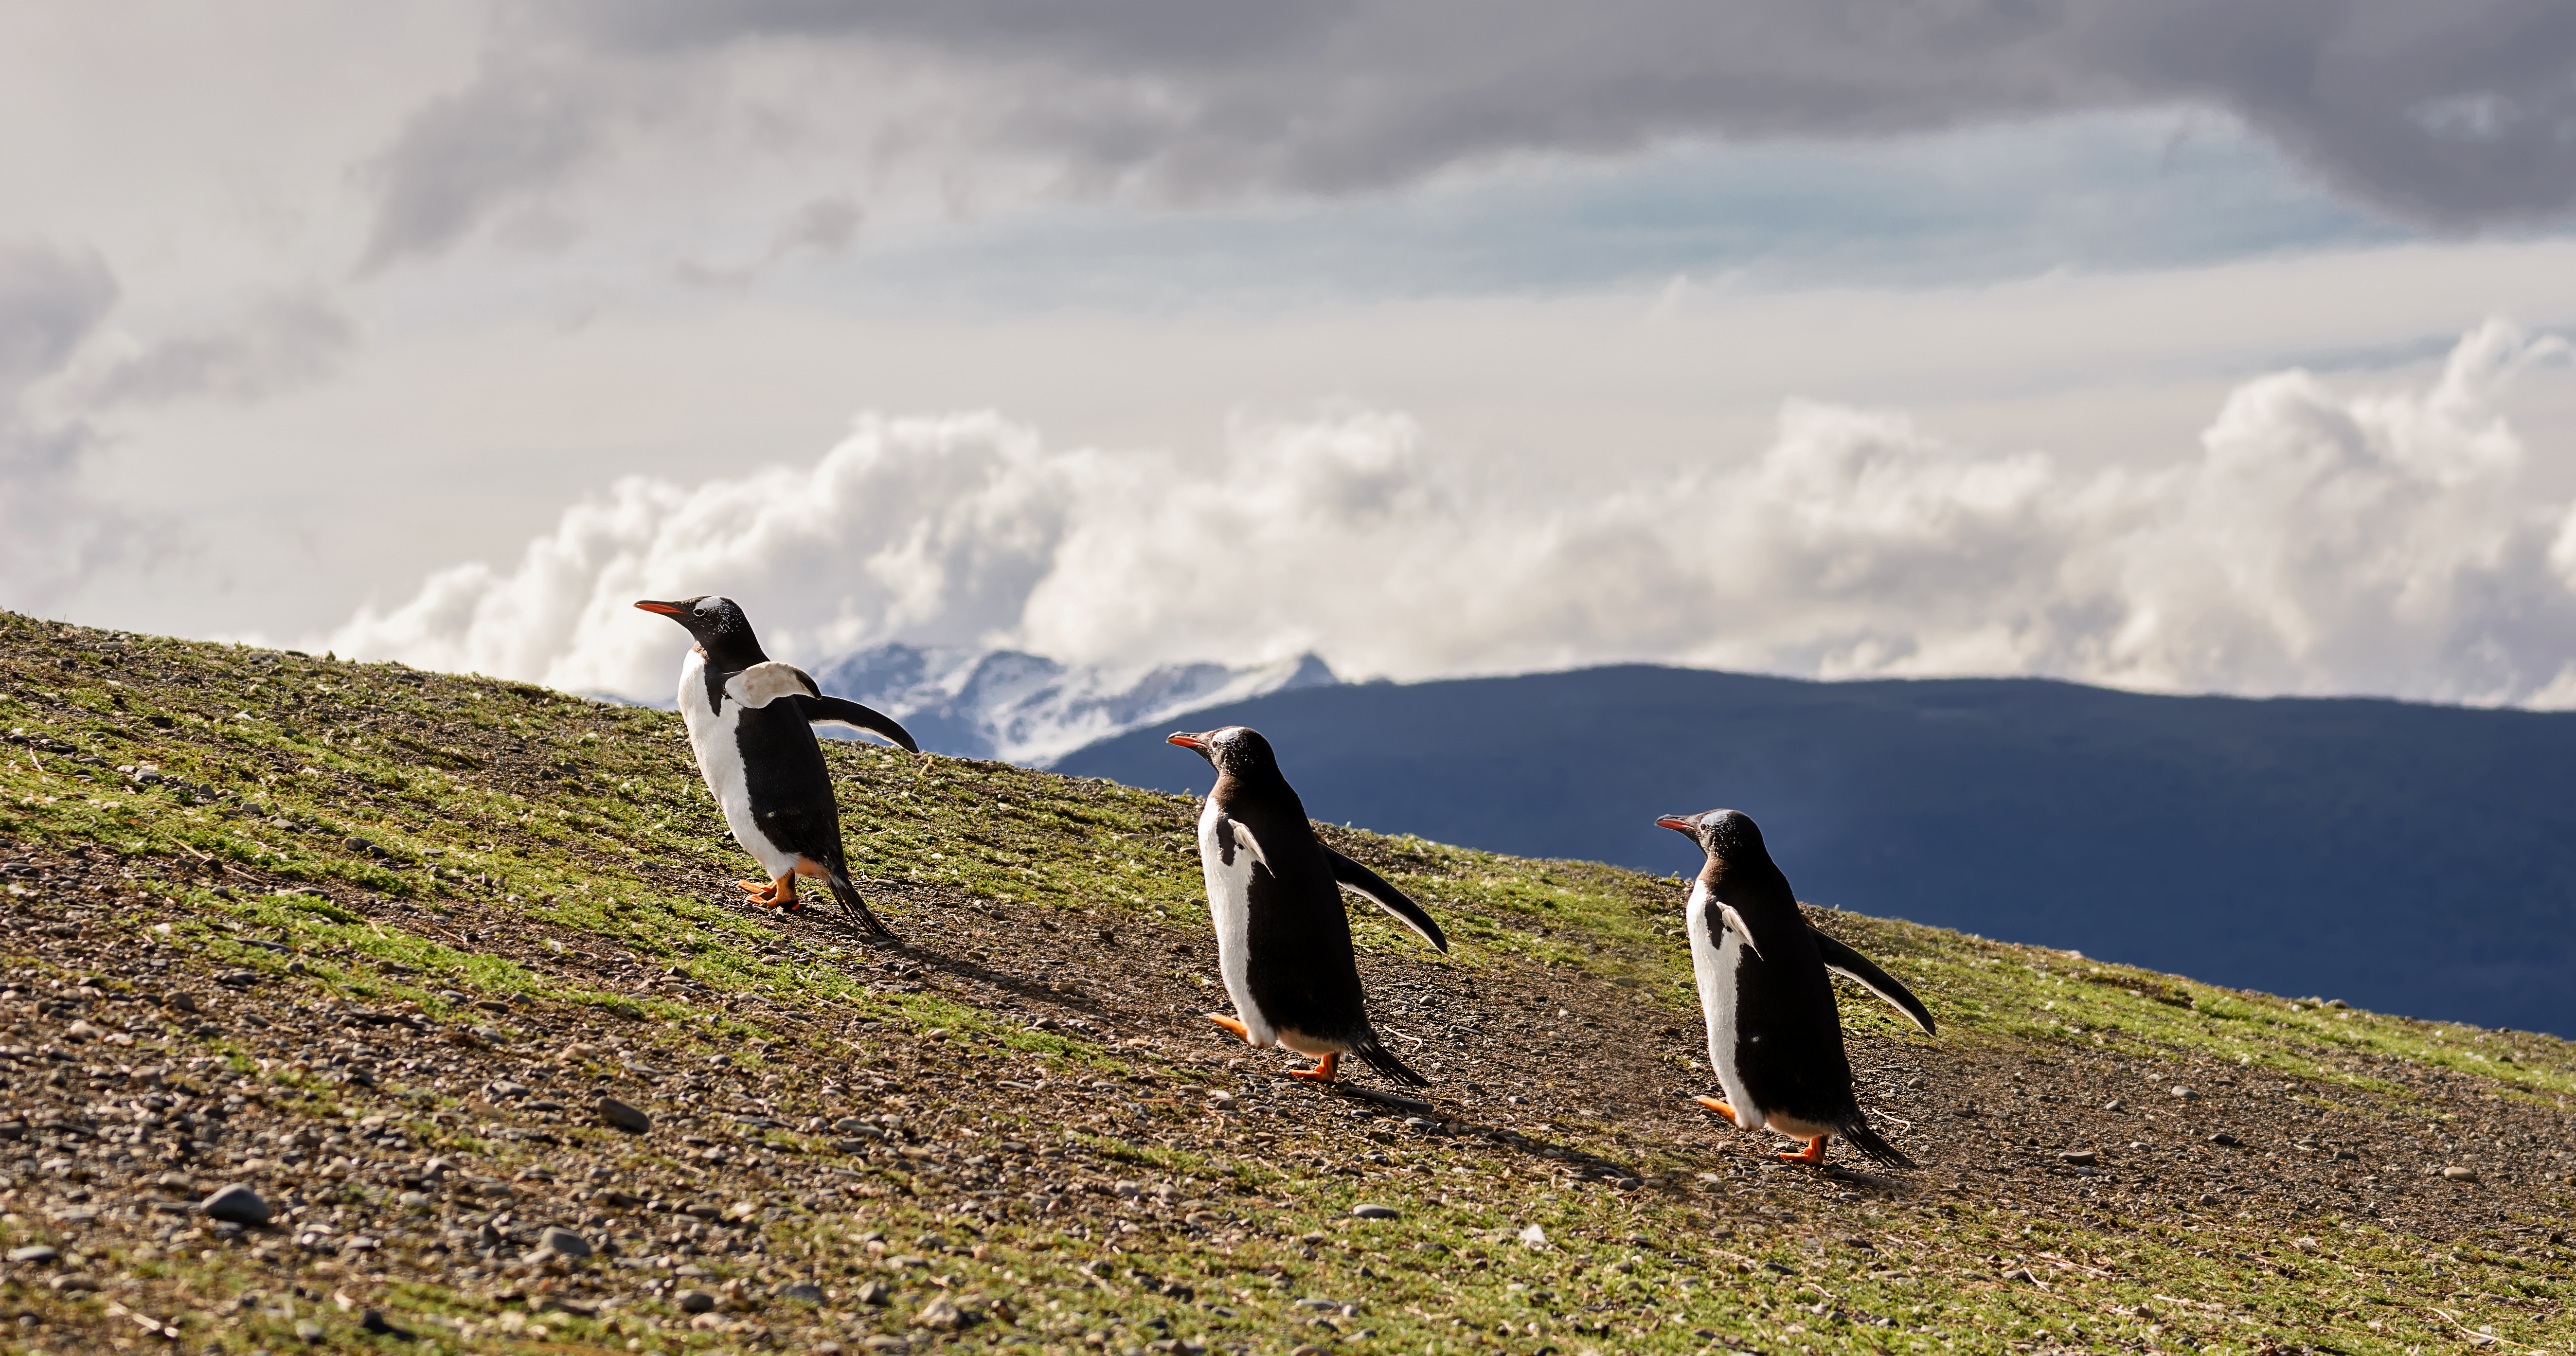 7 Places to See Penguins in the Wild